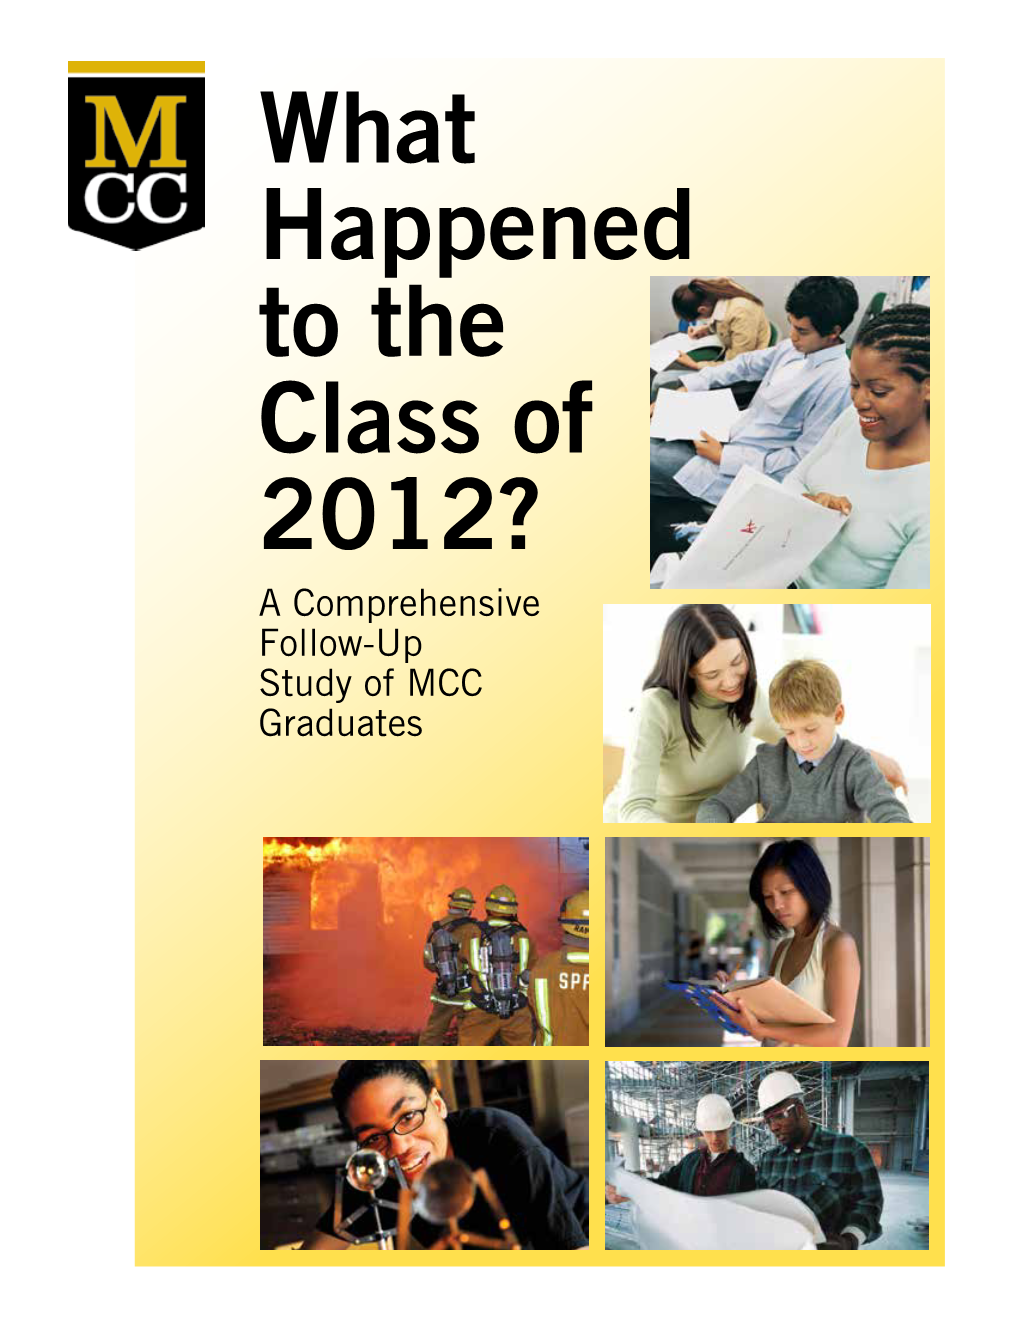 What Happened to the Class of 2012? a Comprehensive Follow-Up Study of MCC Graduates